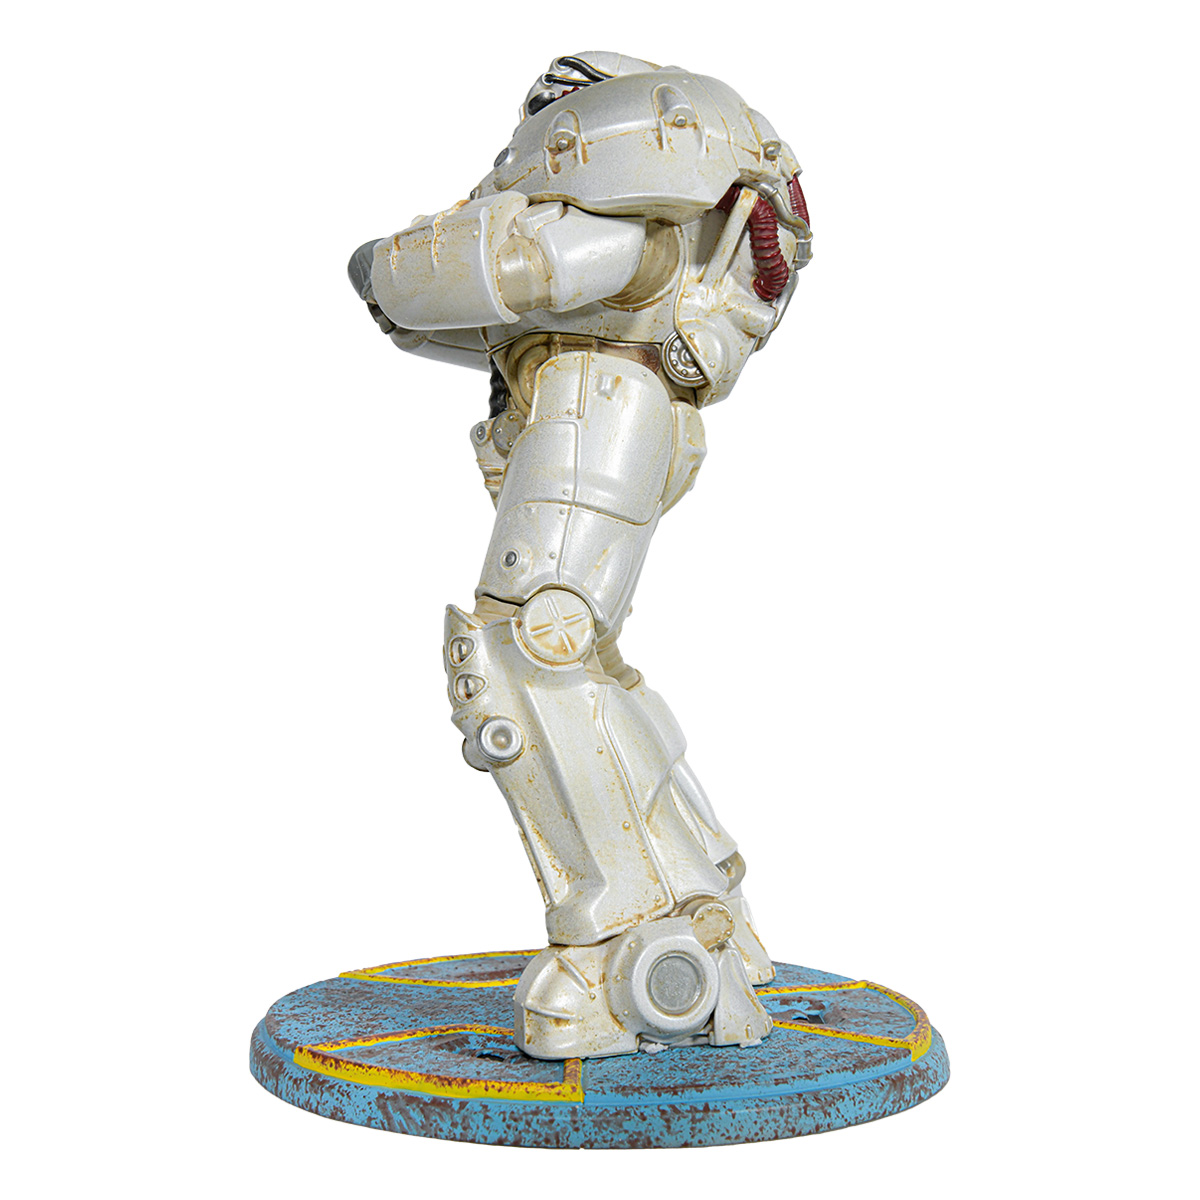 Fallout Power Armor Statue "Institute" Image 3